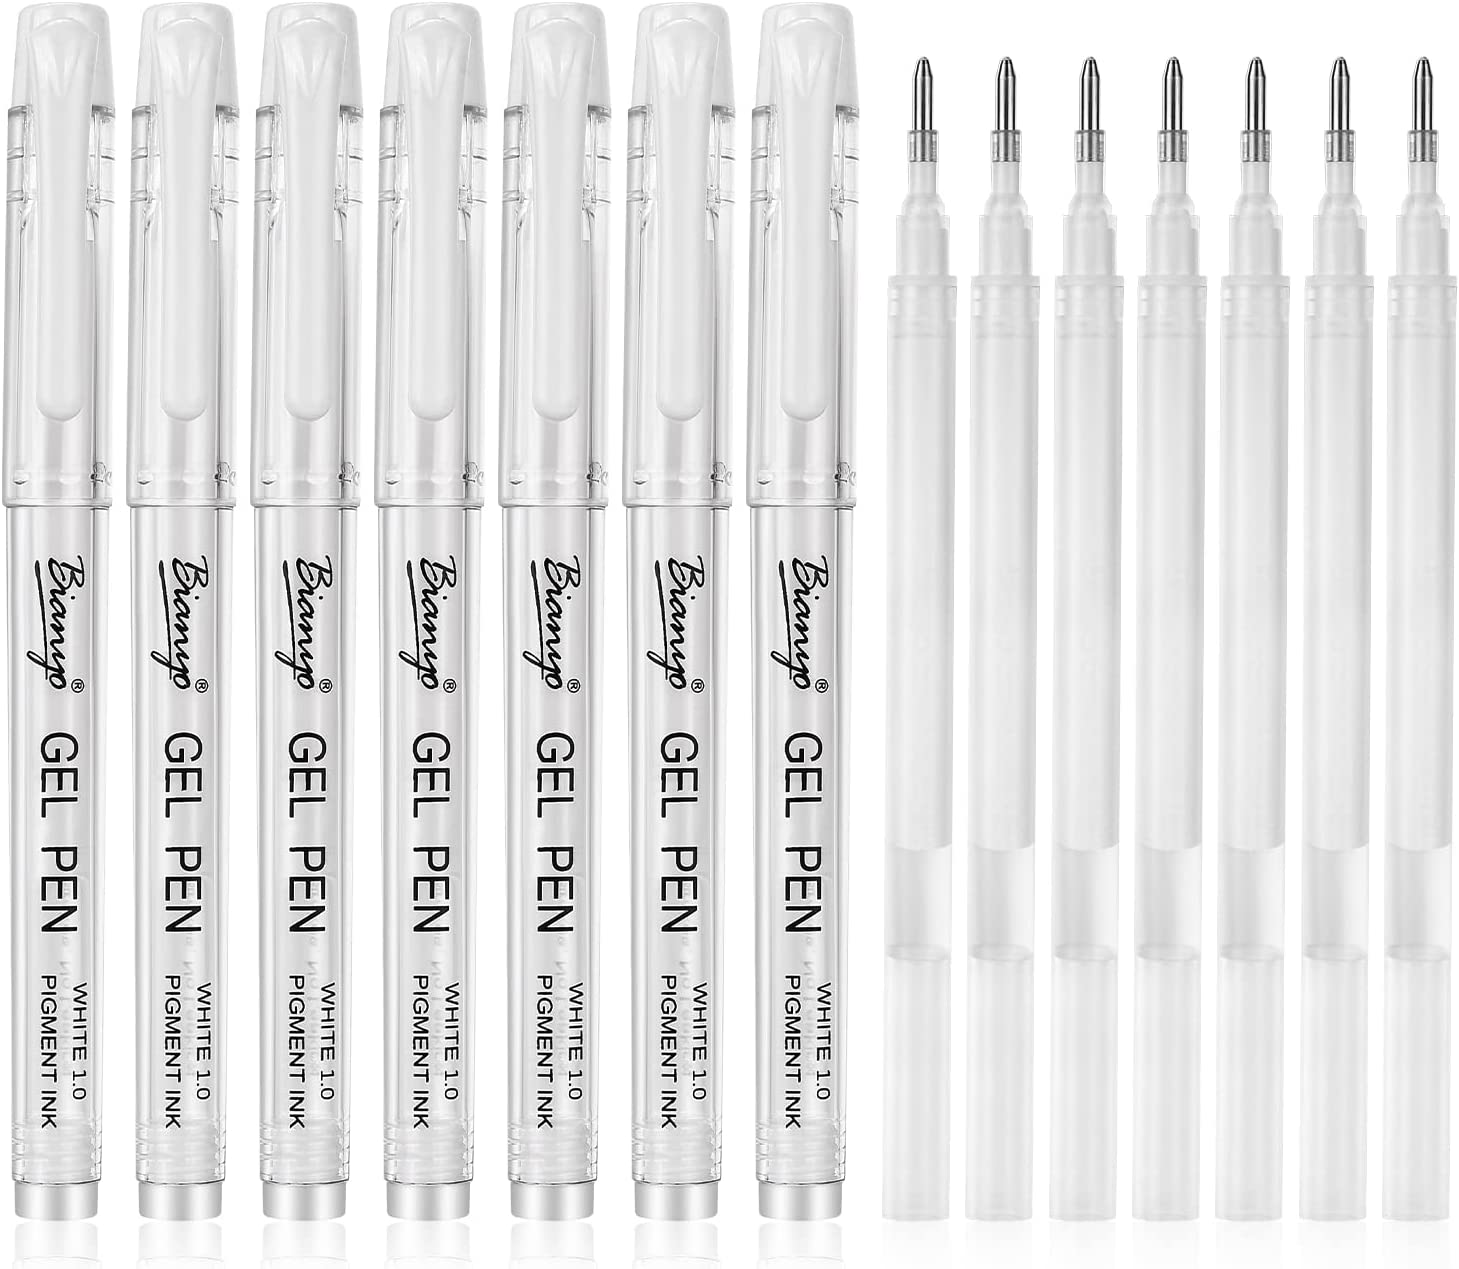 Bianyo White Gel Pen Combo Set, Pack of 7 White Gel Pens and 7 Refills in a  Zipper Pouch